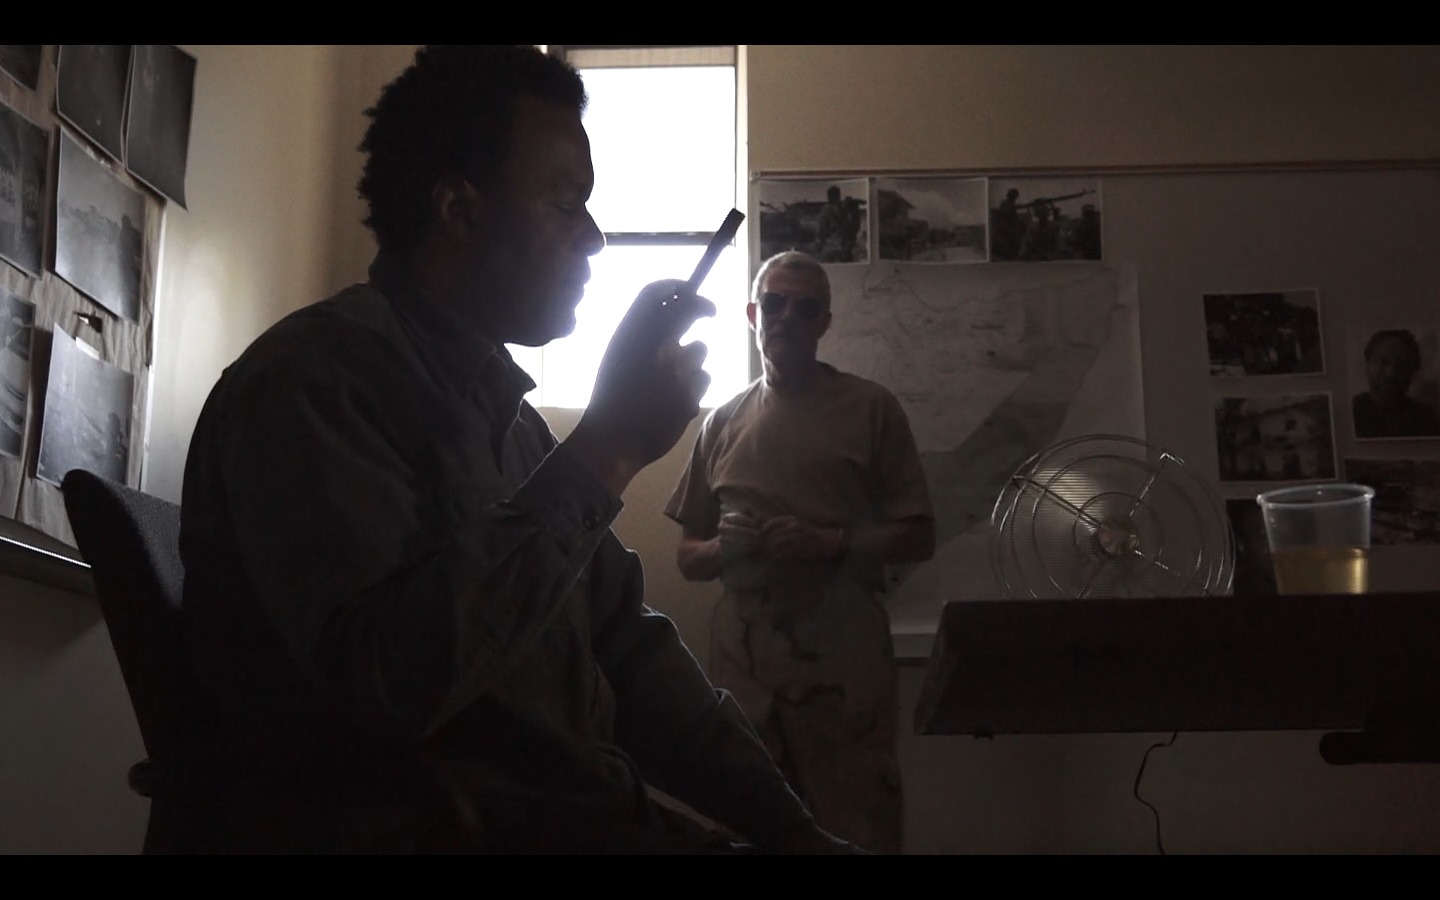 Being interrogated by American Soldier. In the Movie The Genocide.